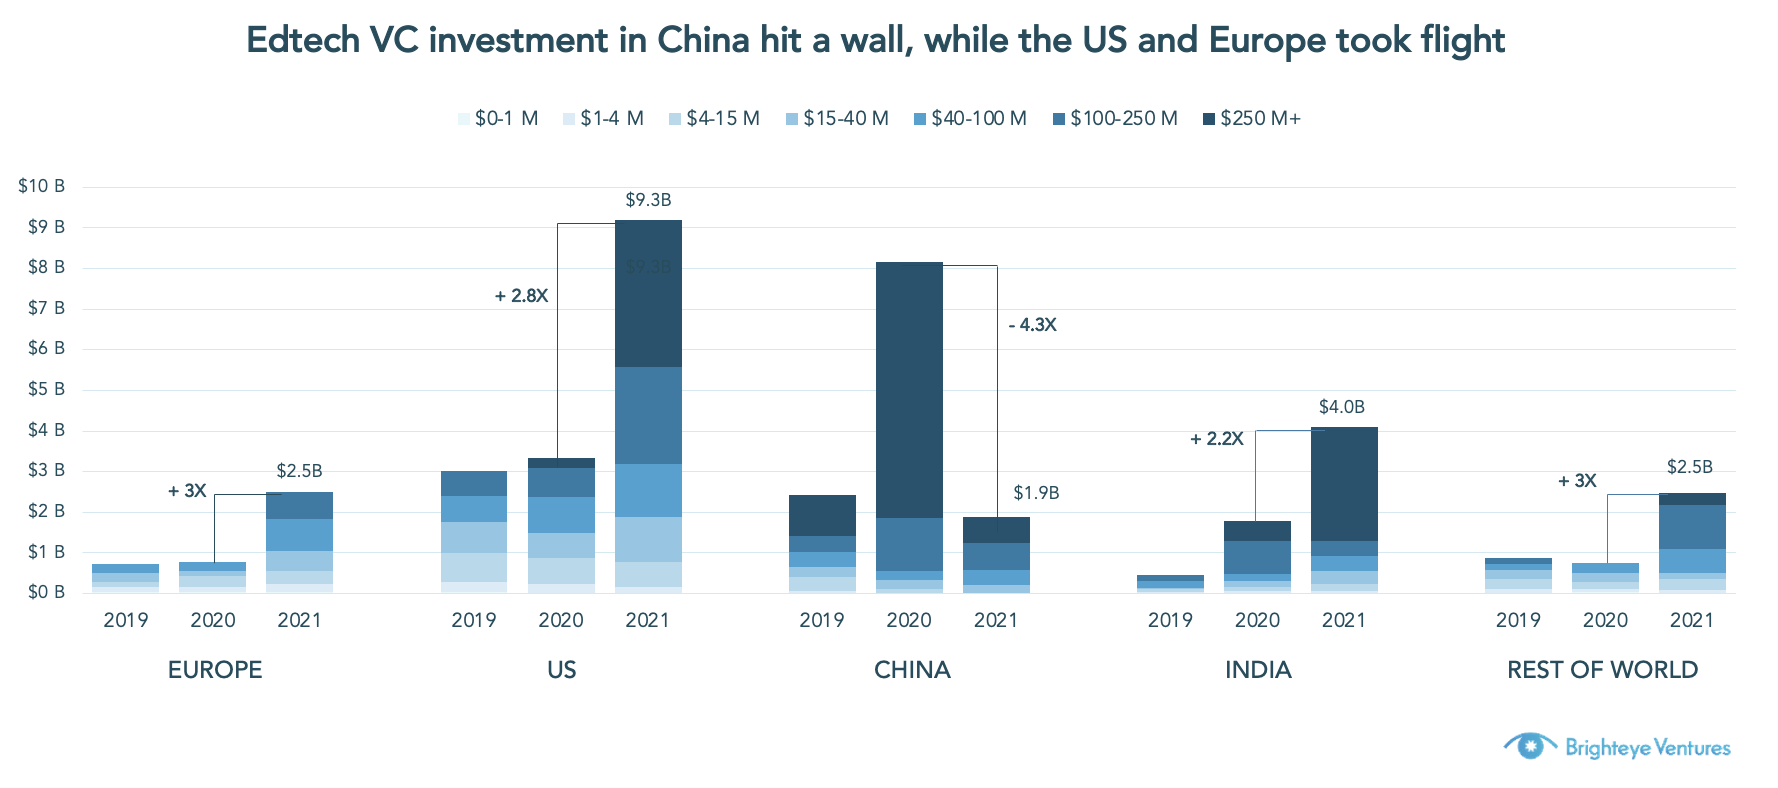 Edtech investment in China plummeted while investments skyrocketed in the rest of the world